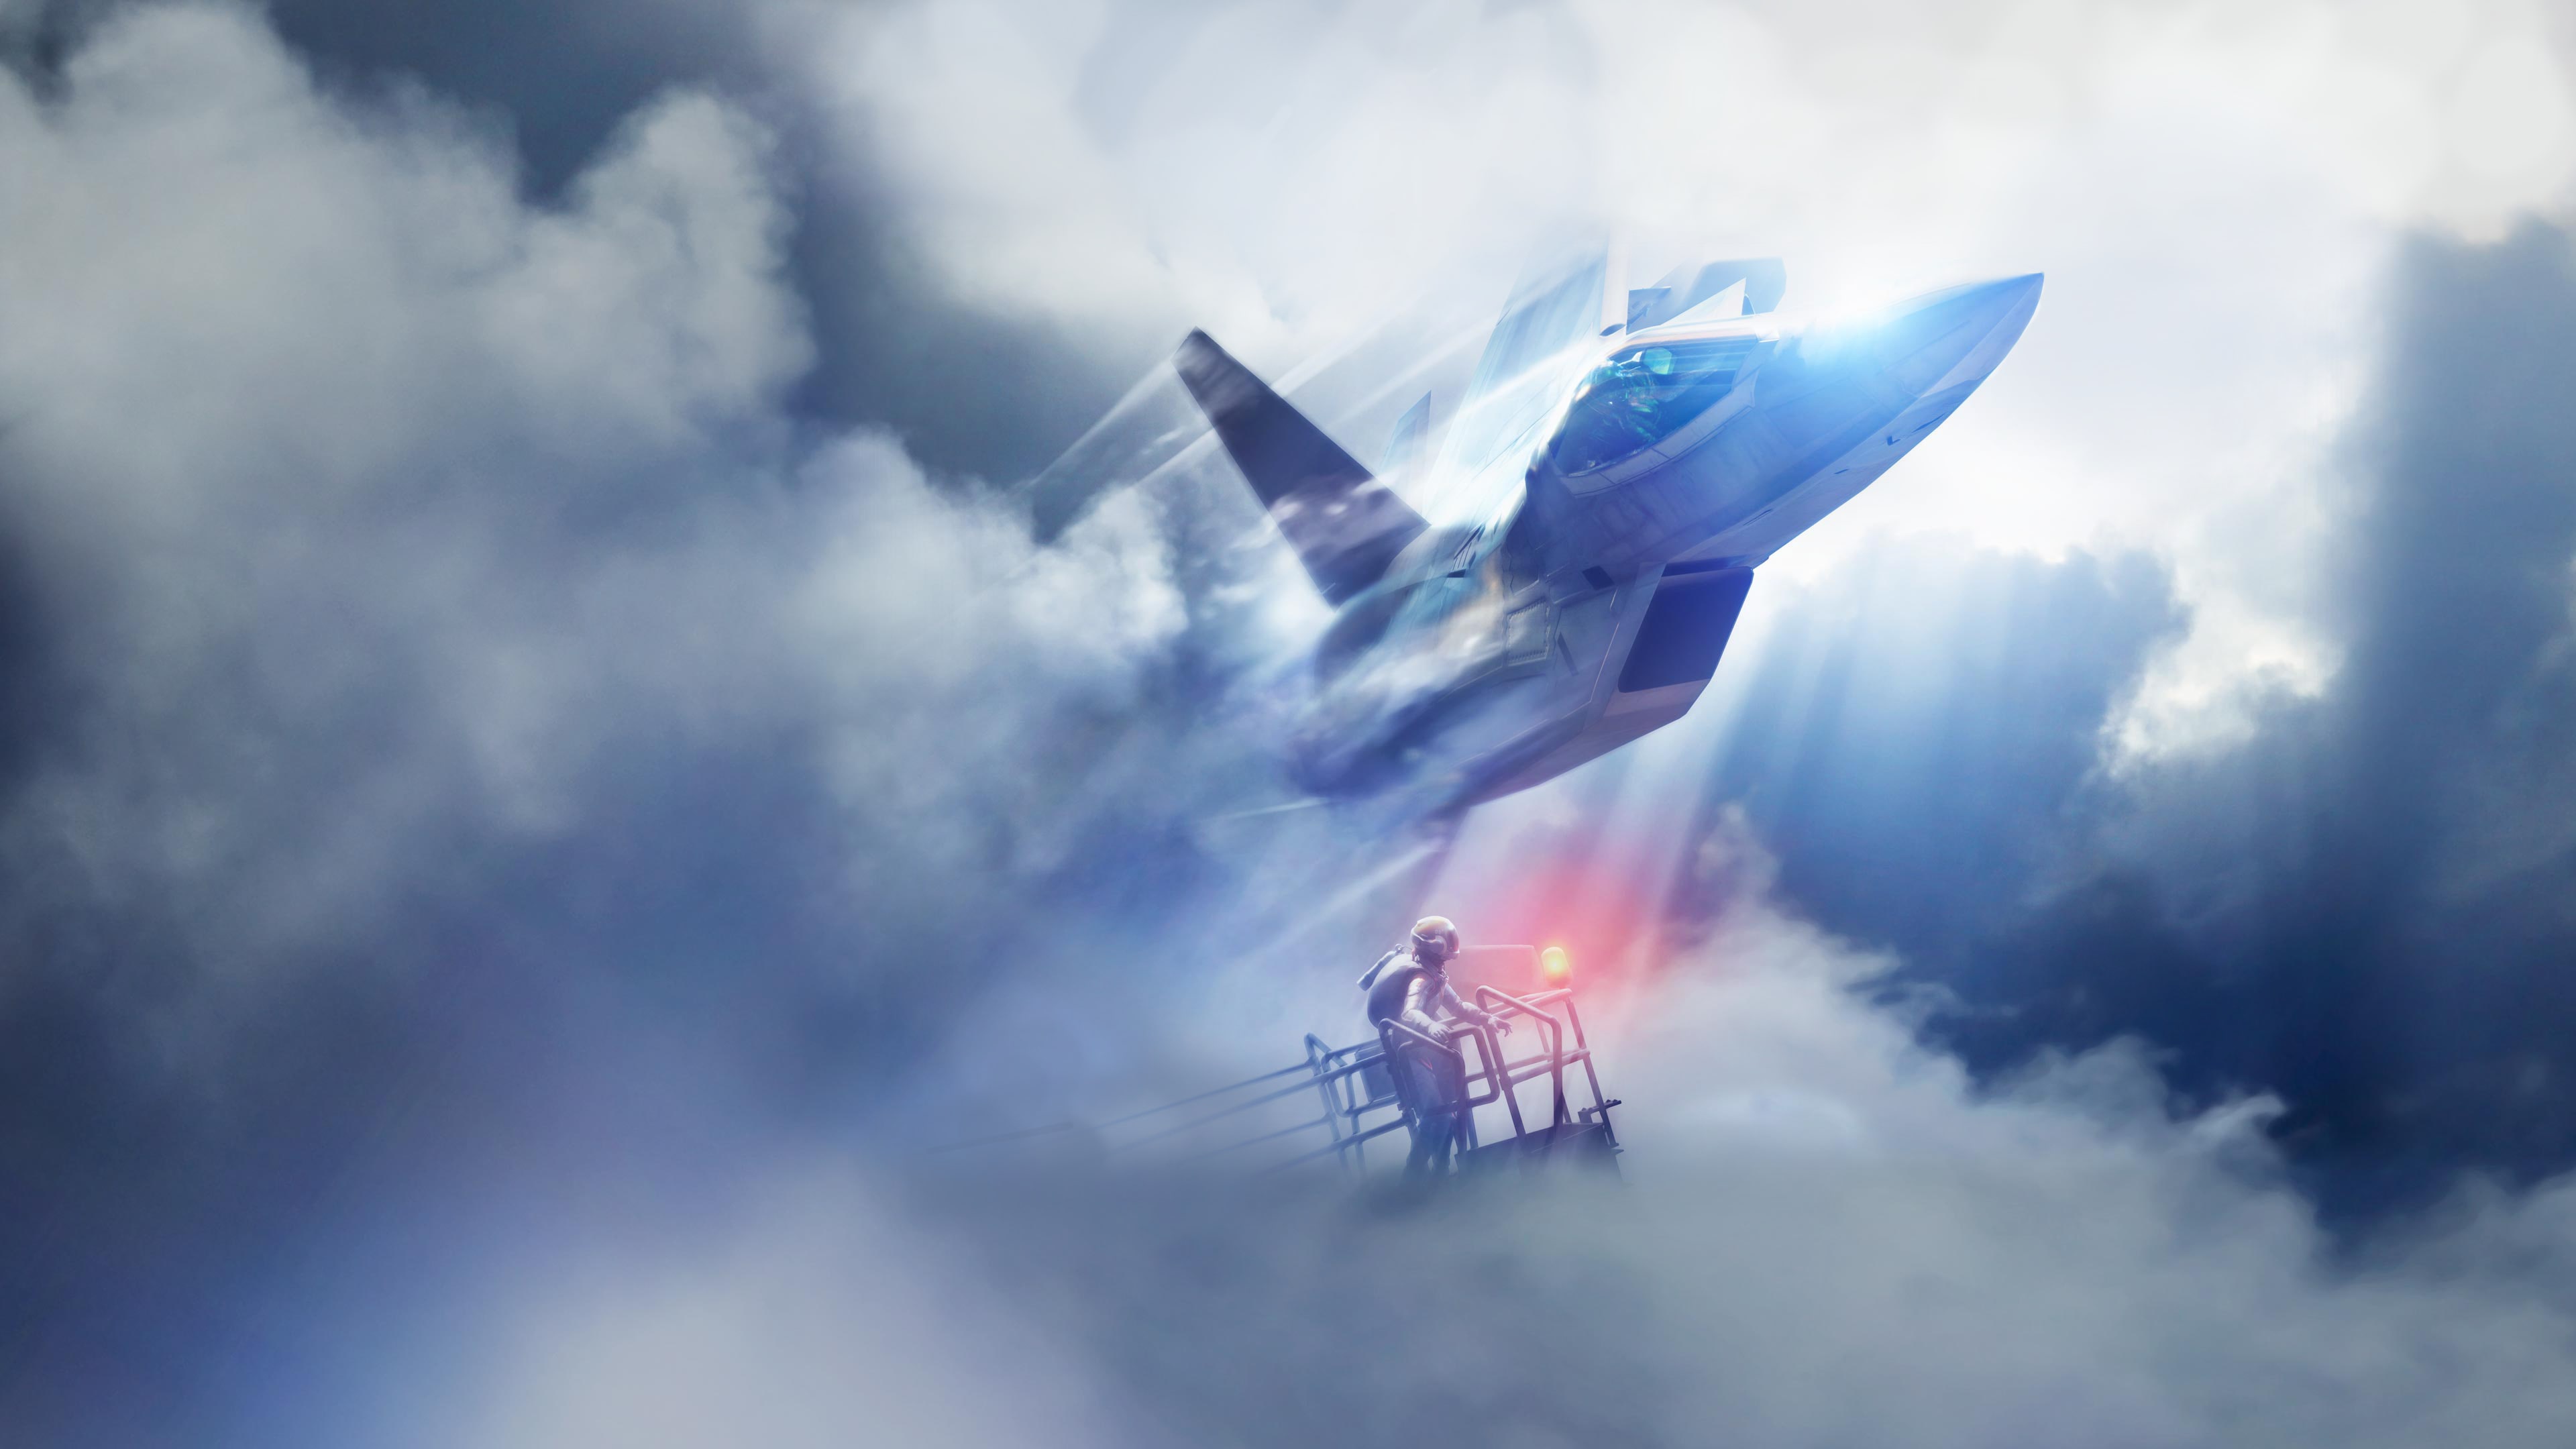 ACE COMBAT™ 7: SKIES UNKNOWN Welcome Price!!